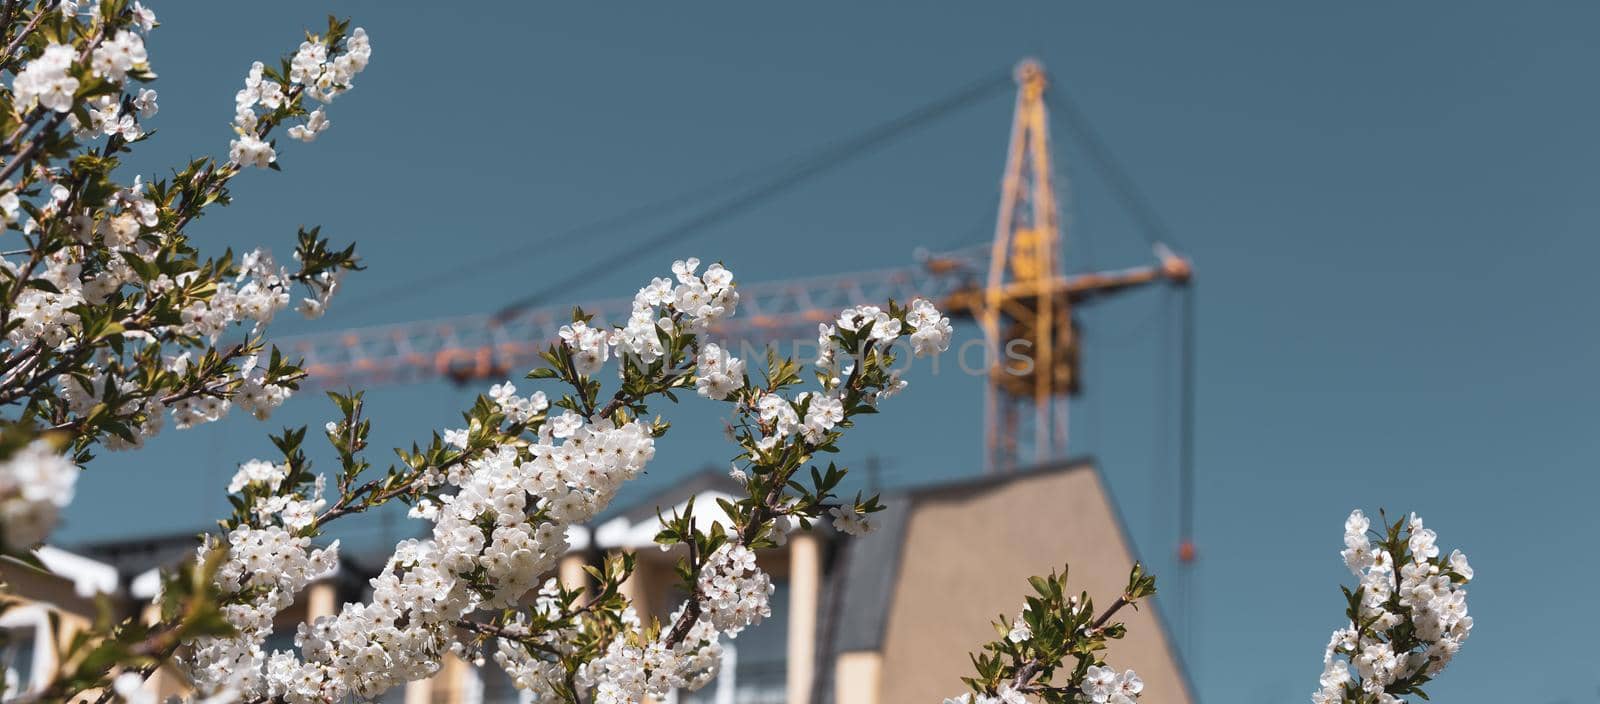 Construction crane with a spring flowering trees by palinchak